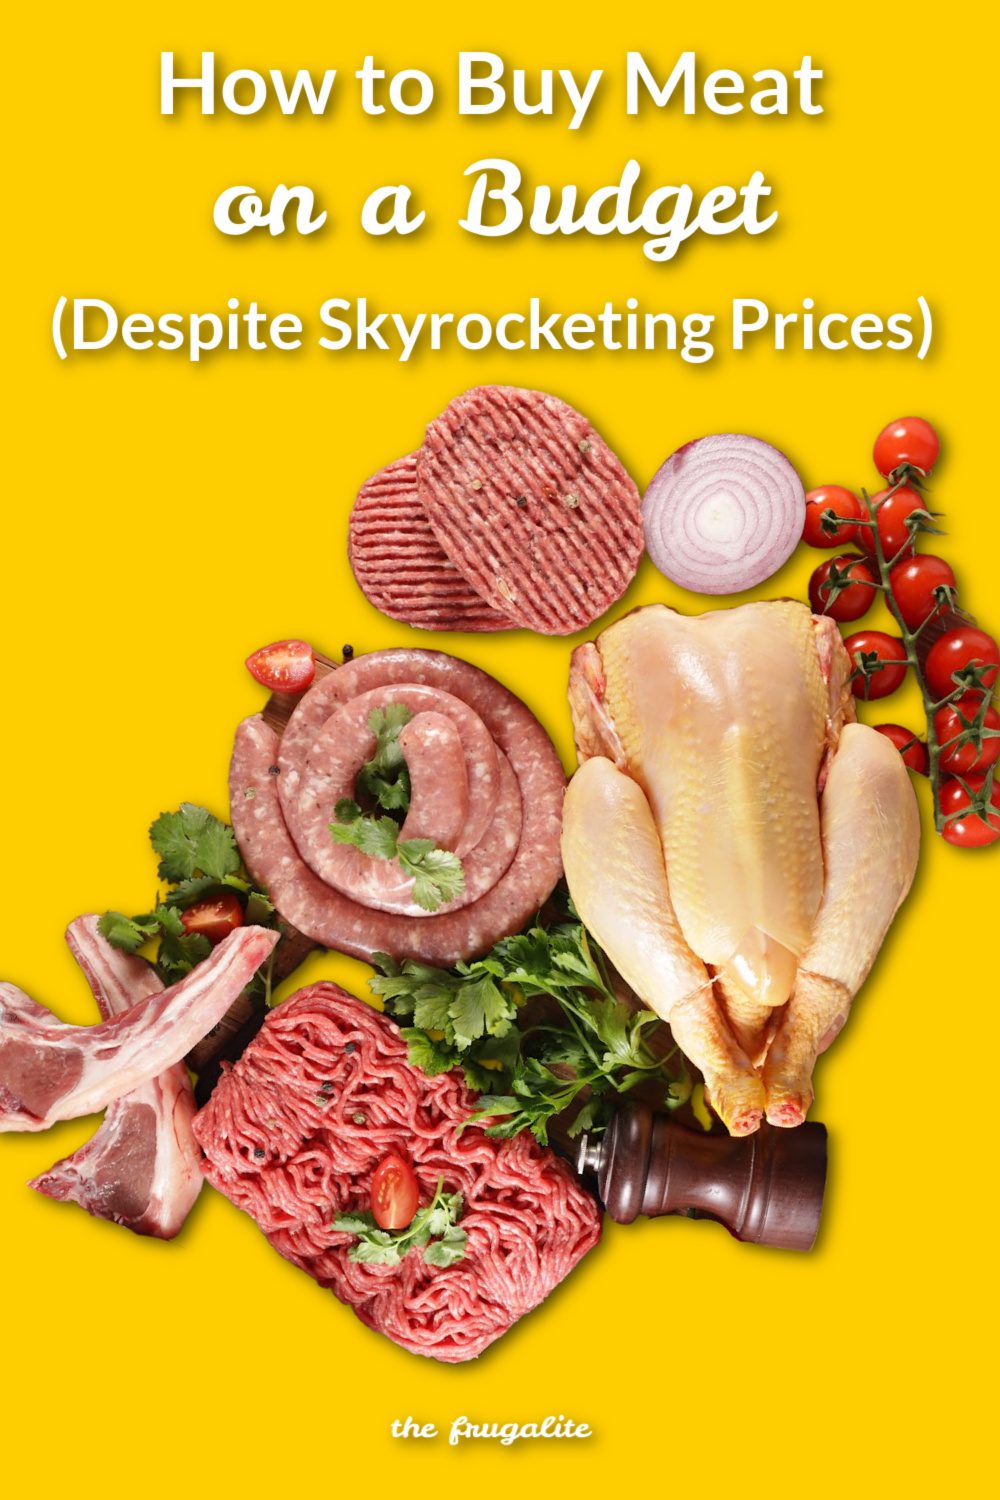 How to Buy Meat on a Budget (Despite Skyrocketing Prices)